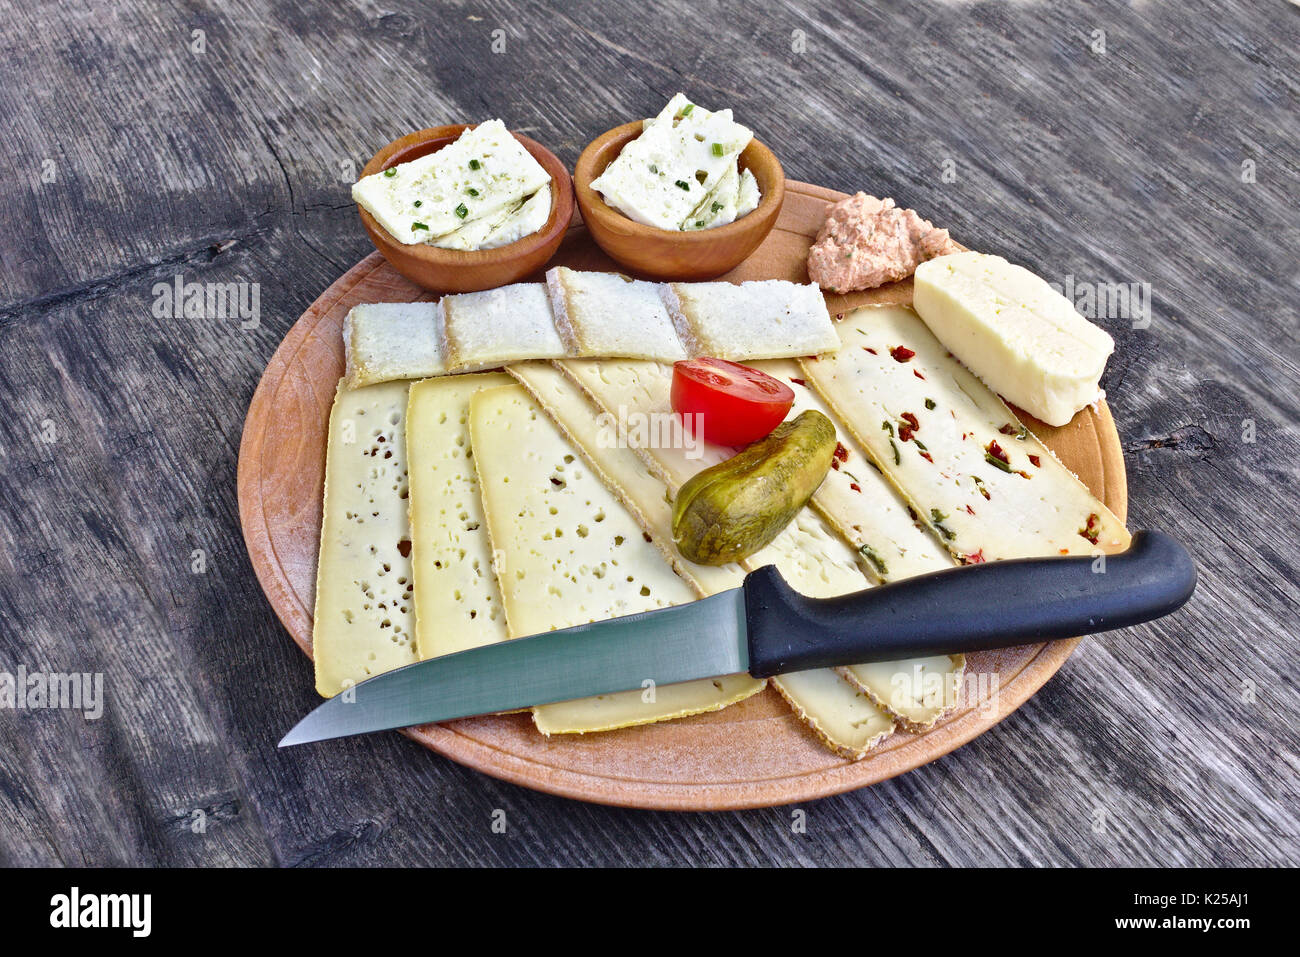 Wooden plate with a selection of cheeses, tomato, pickle and knife on a weathered wooden table Stock Photo